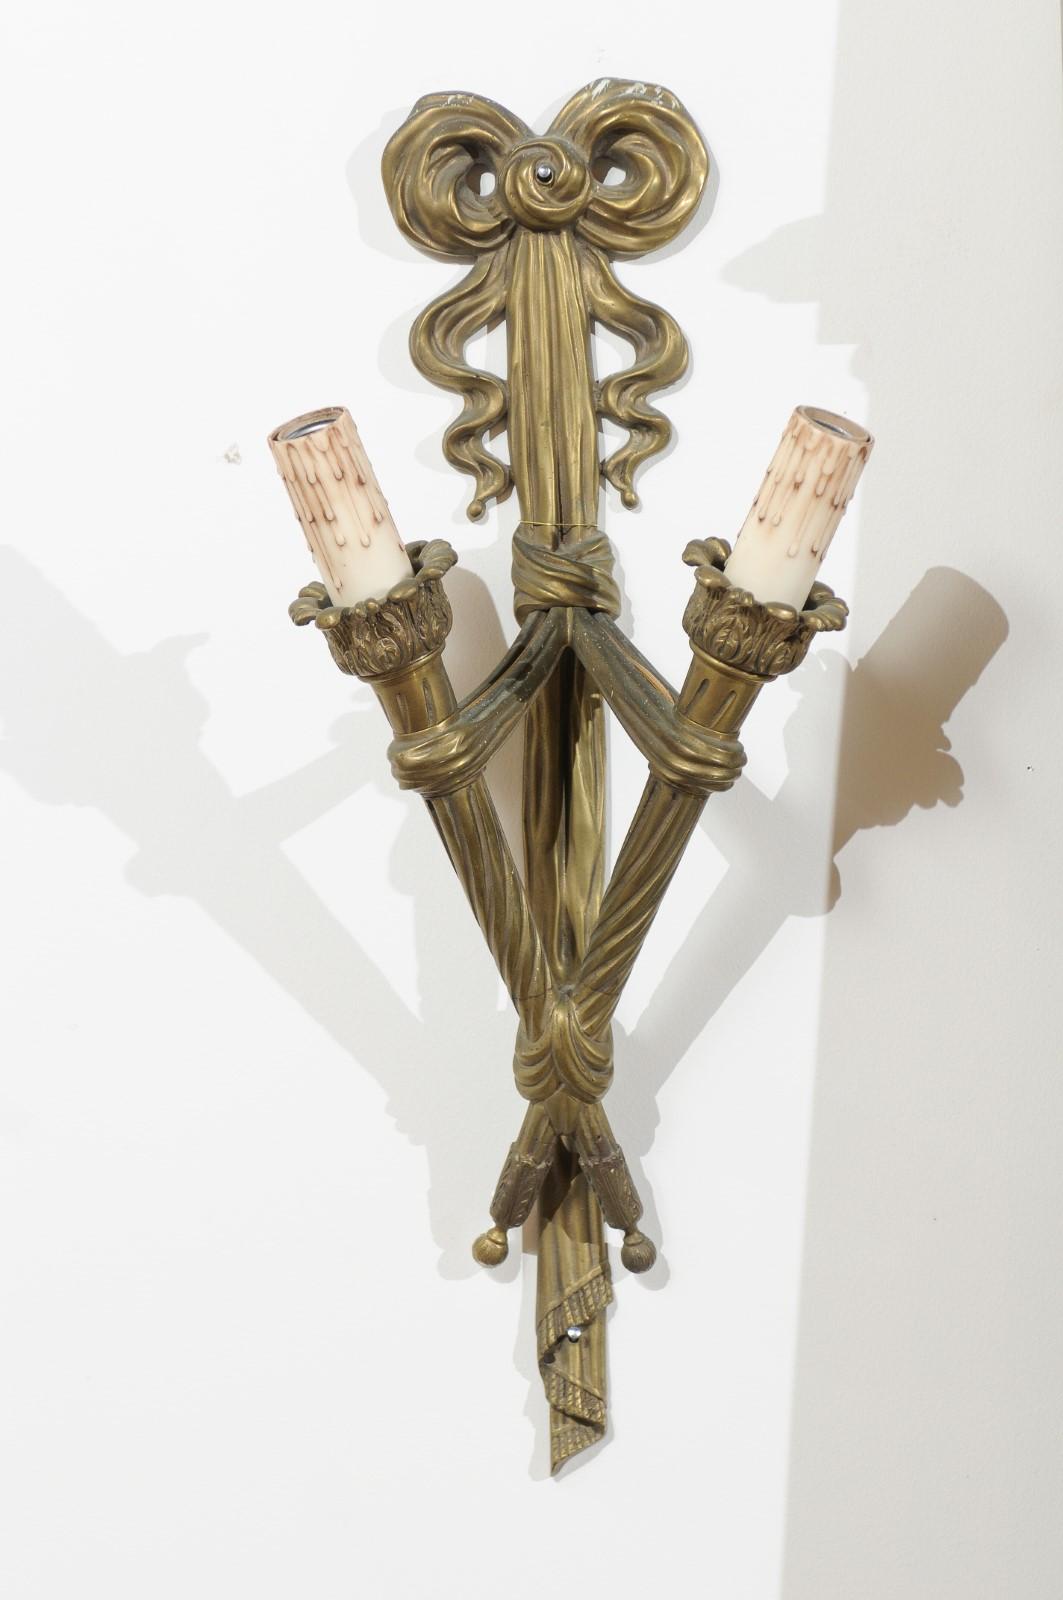 A pair of French two-light bronze sconces from the 19th century, with ribbon-tied torches. Born in France during the 19th century, each of this pair of wall sconces features two ribbon-tied torches supporting their candle sleeves and a foliage